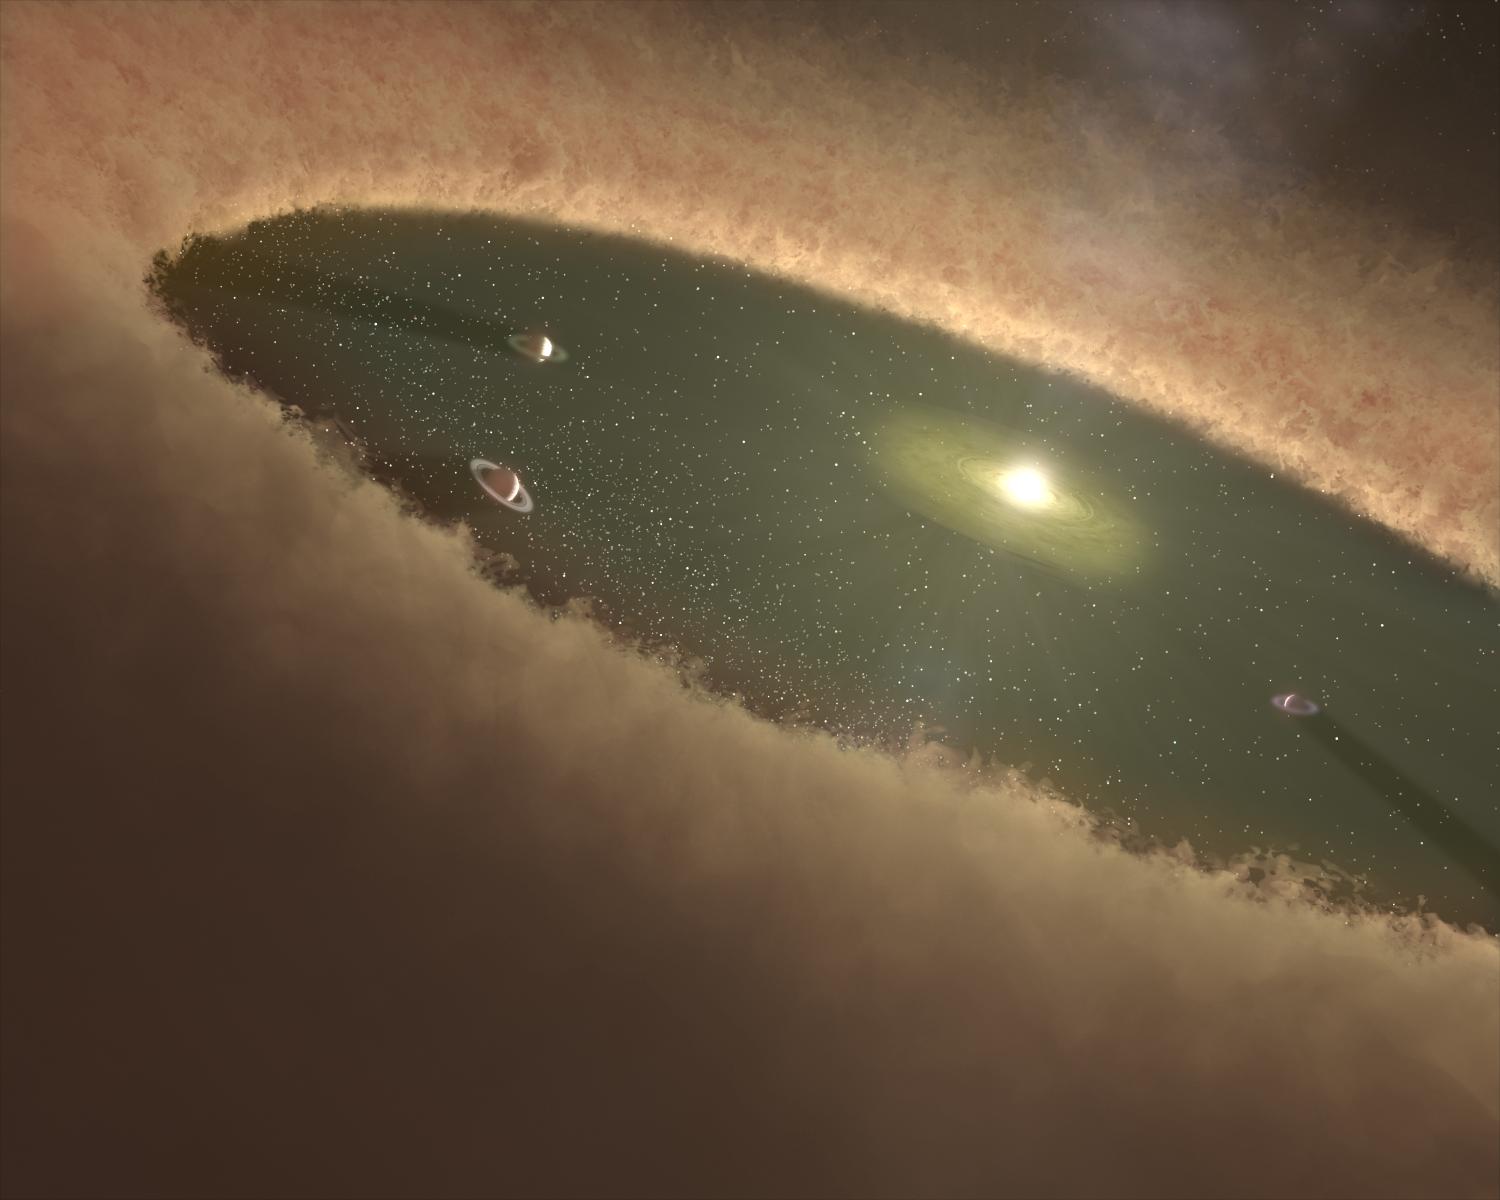 Scientists think 'planetary pebbles' were the building blocks for the largest planets